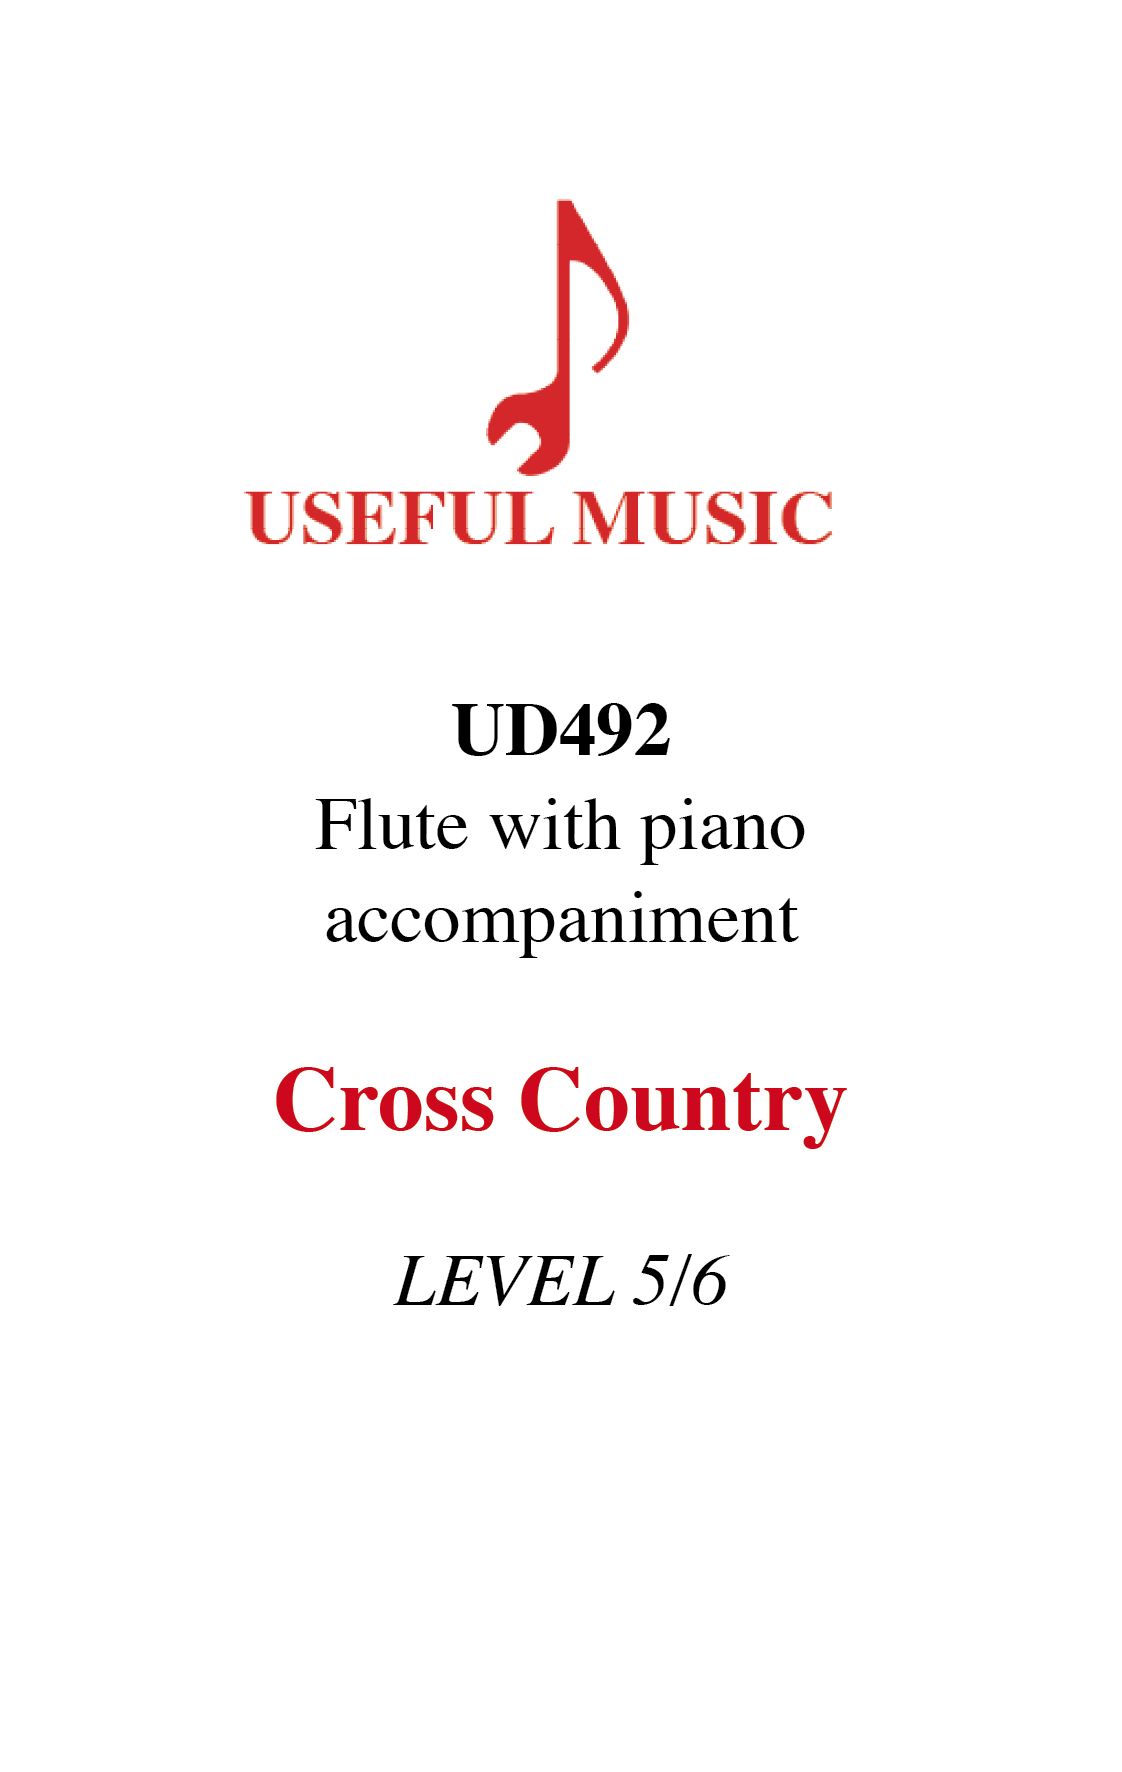 Cross Country - flute with piano accompaniment